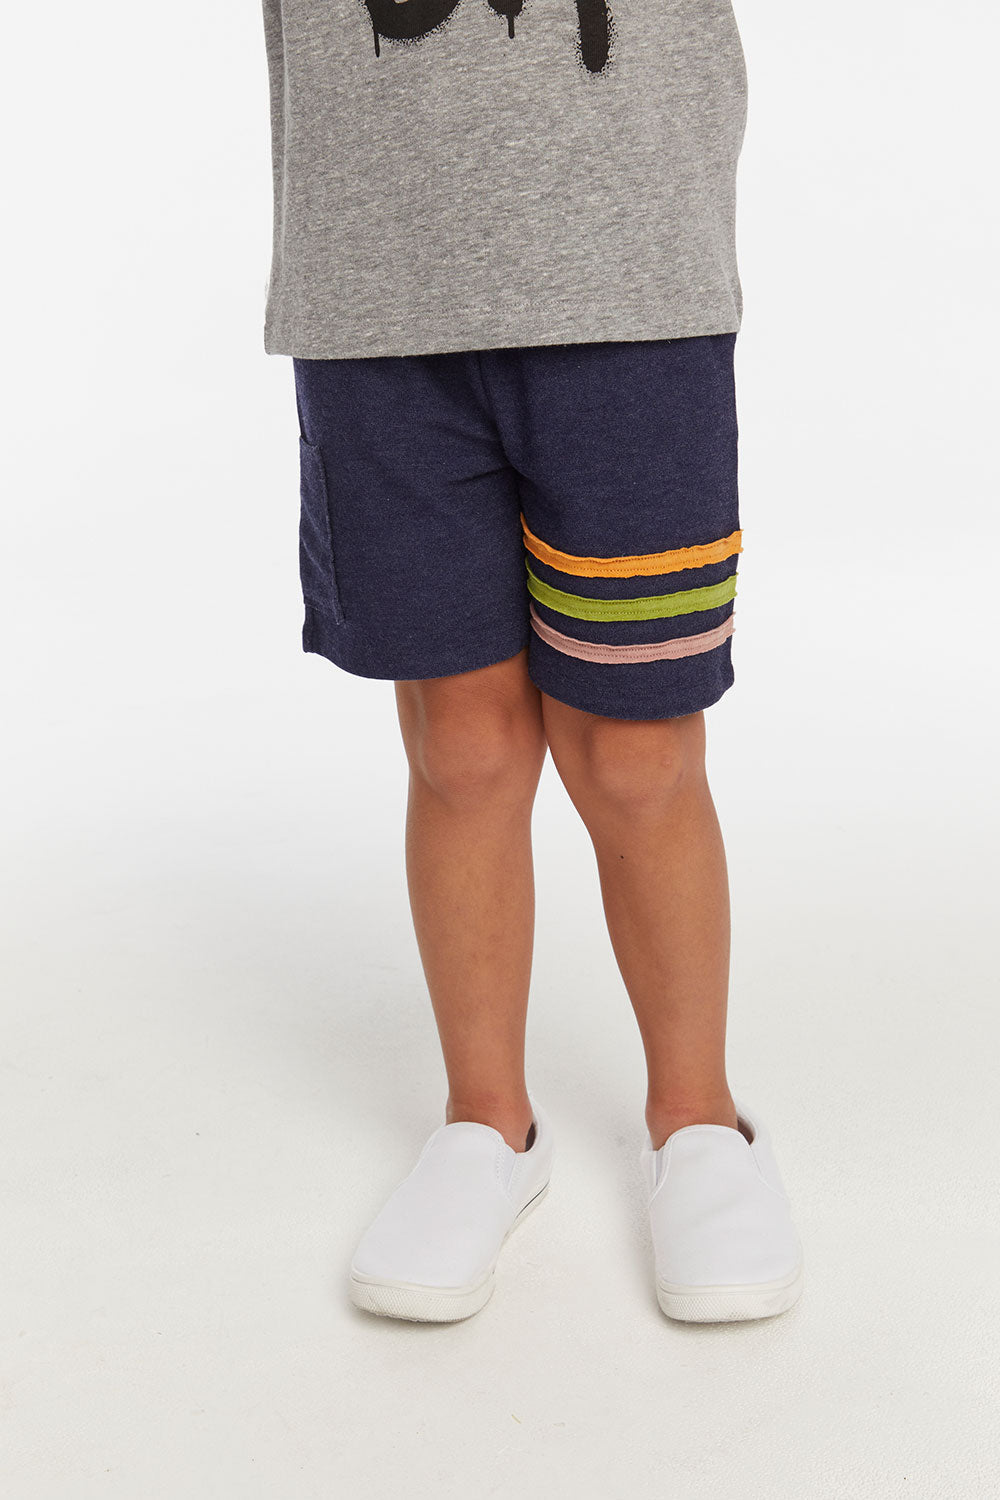 Boys Sapphire Short with Strapping Boys chaserbrand